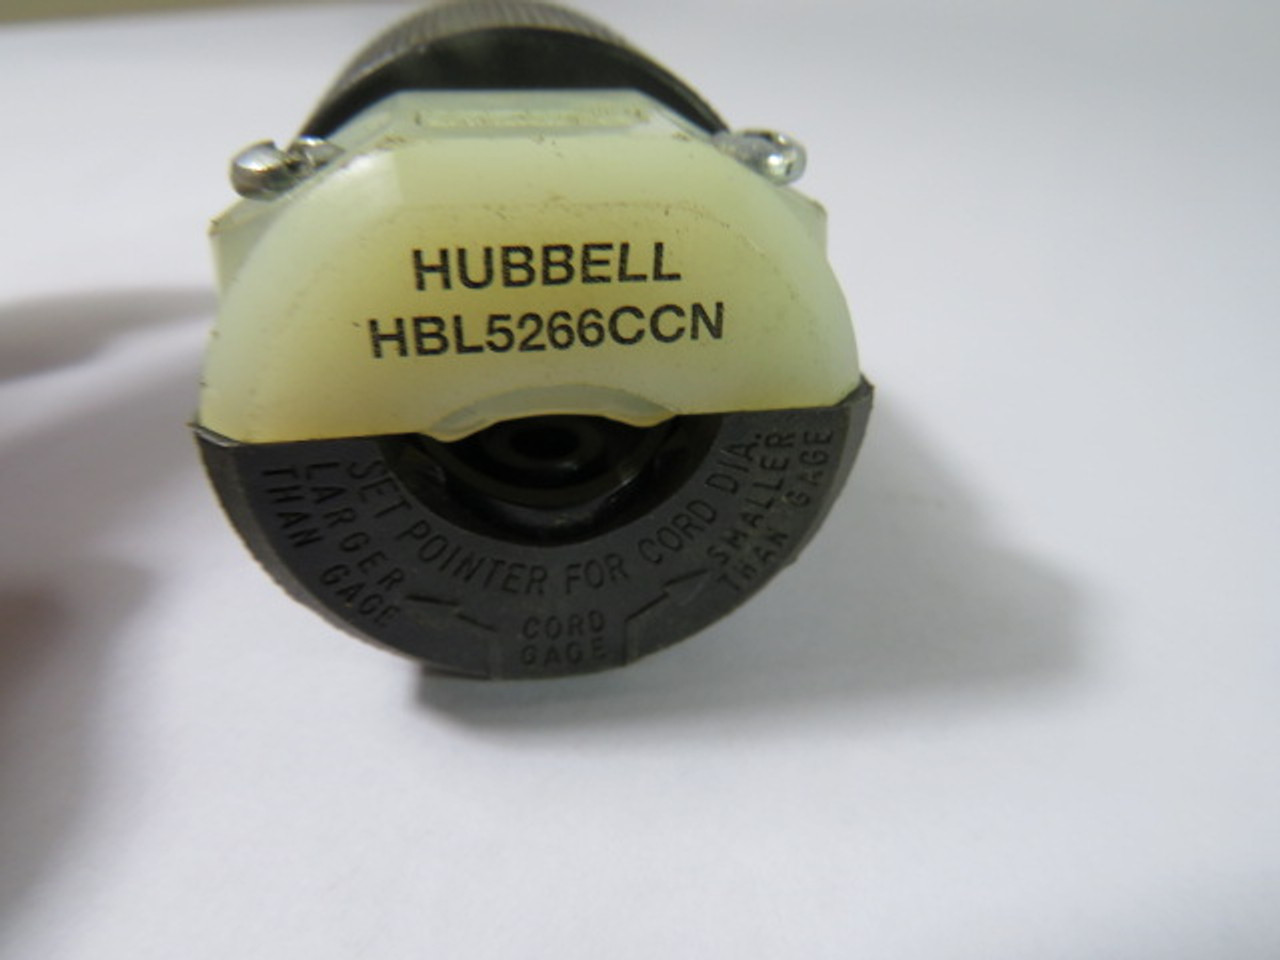 Hubbell HBL5266CCN 15A 125V Plug USED